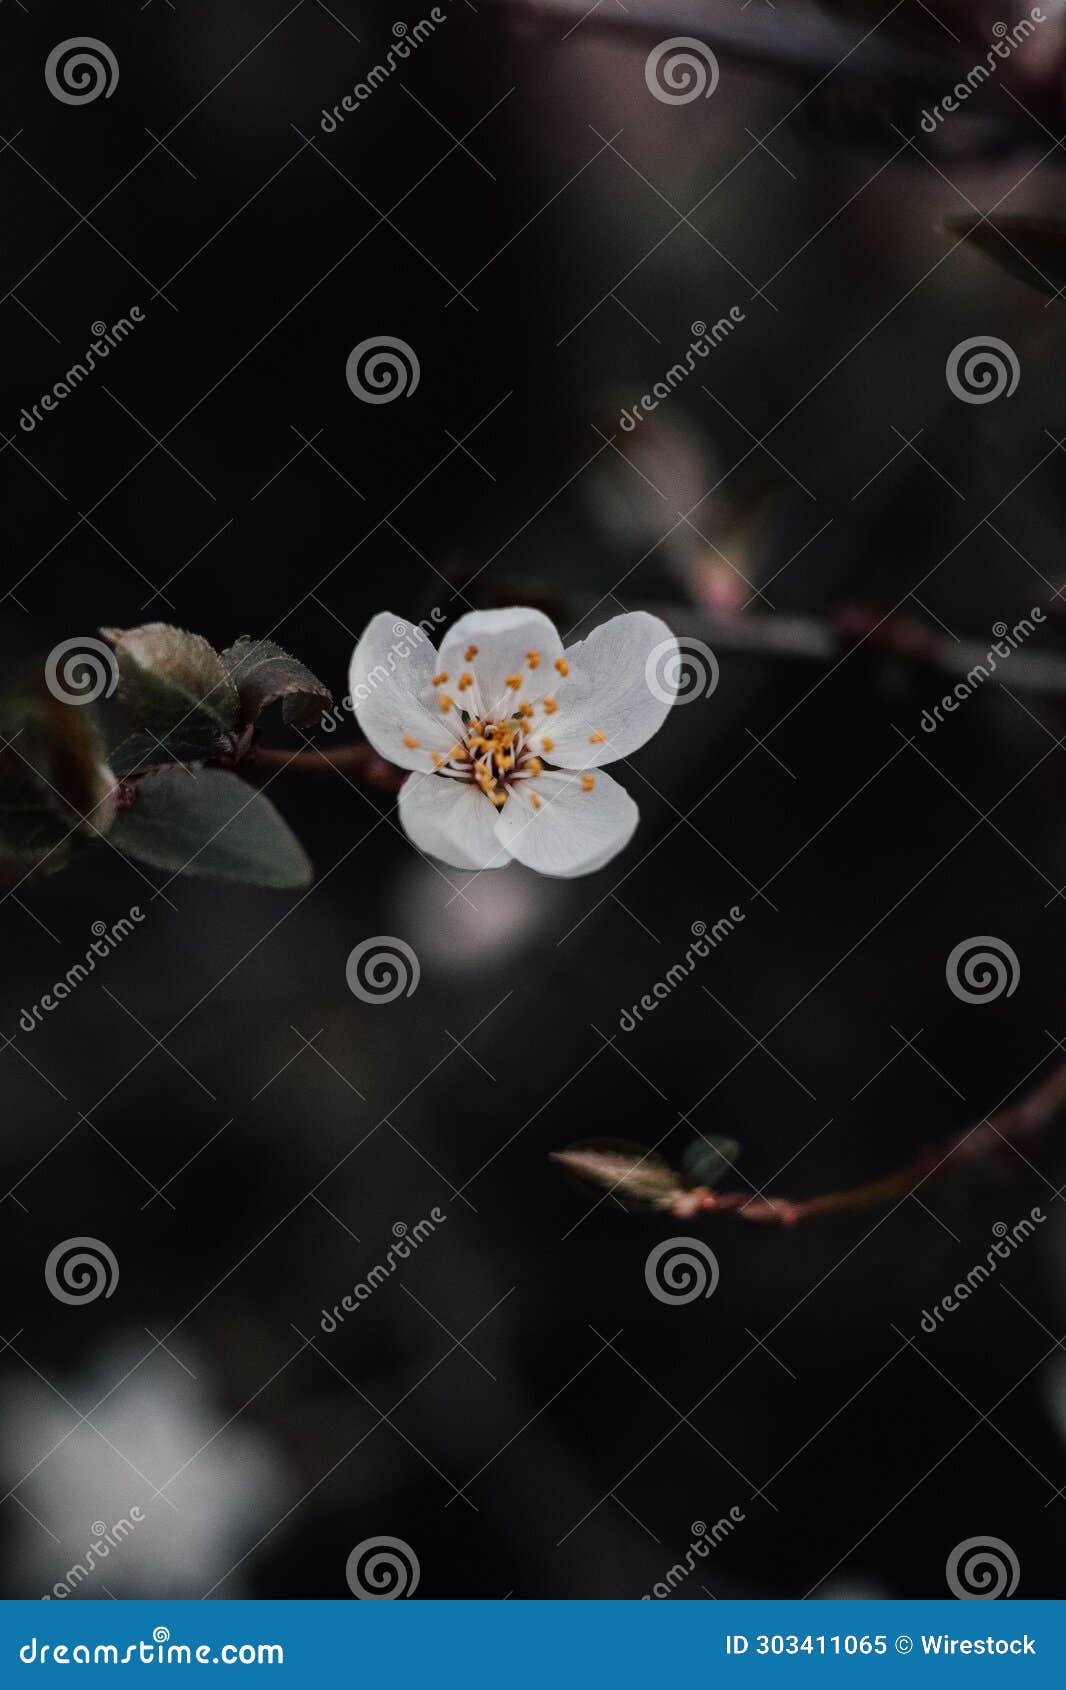 closeup of a small white flower on a tree branch.